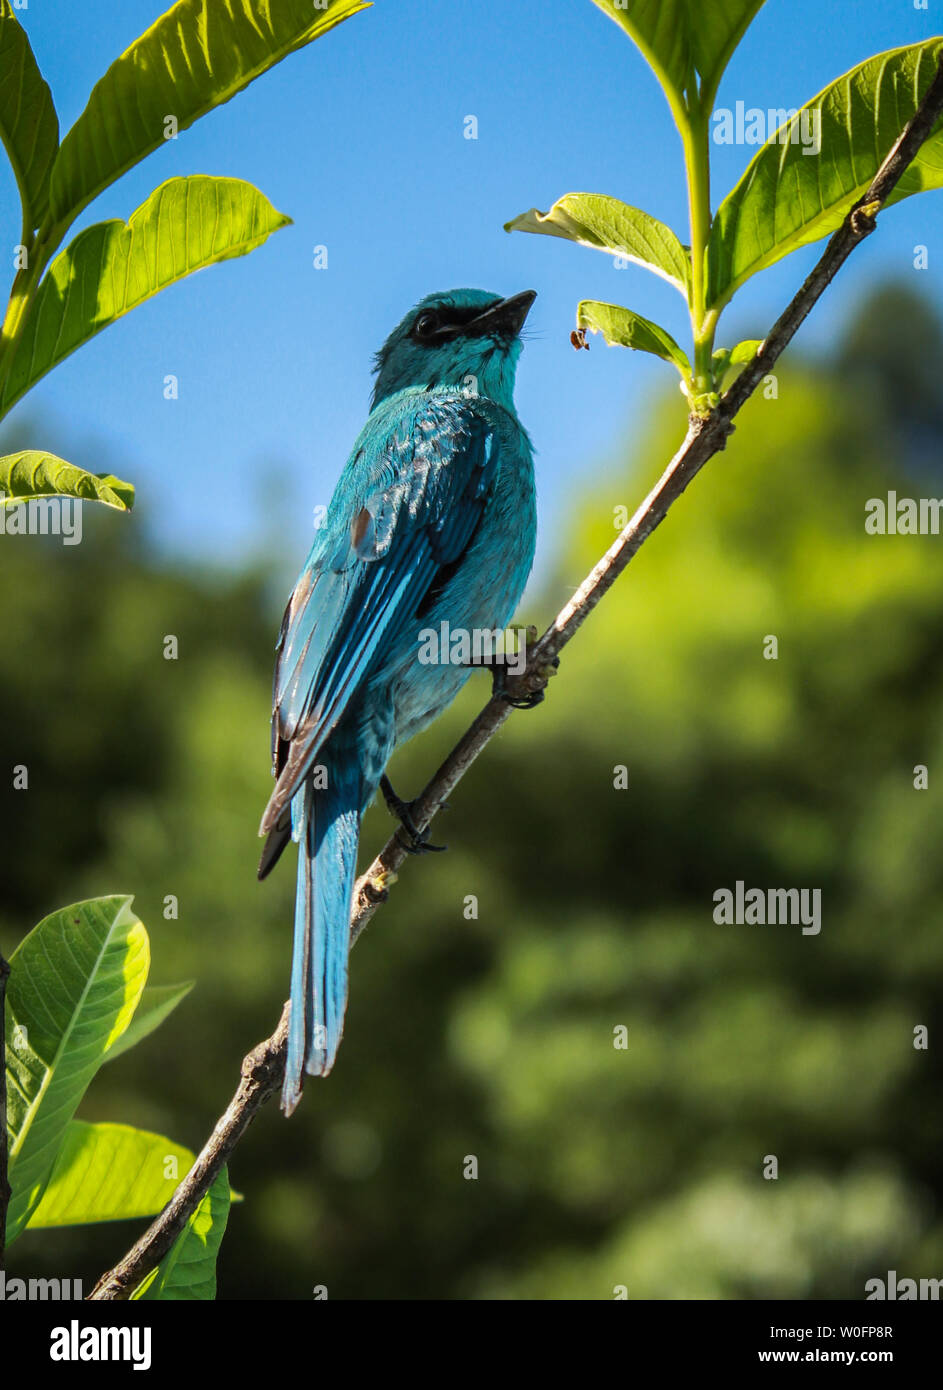 A Verditer flycatcher perched on a guava tree. they are found in Himalayas, as well as south east Asia. Stock Photo